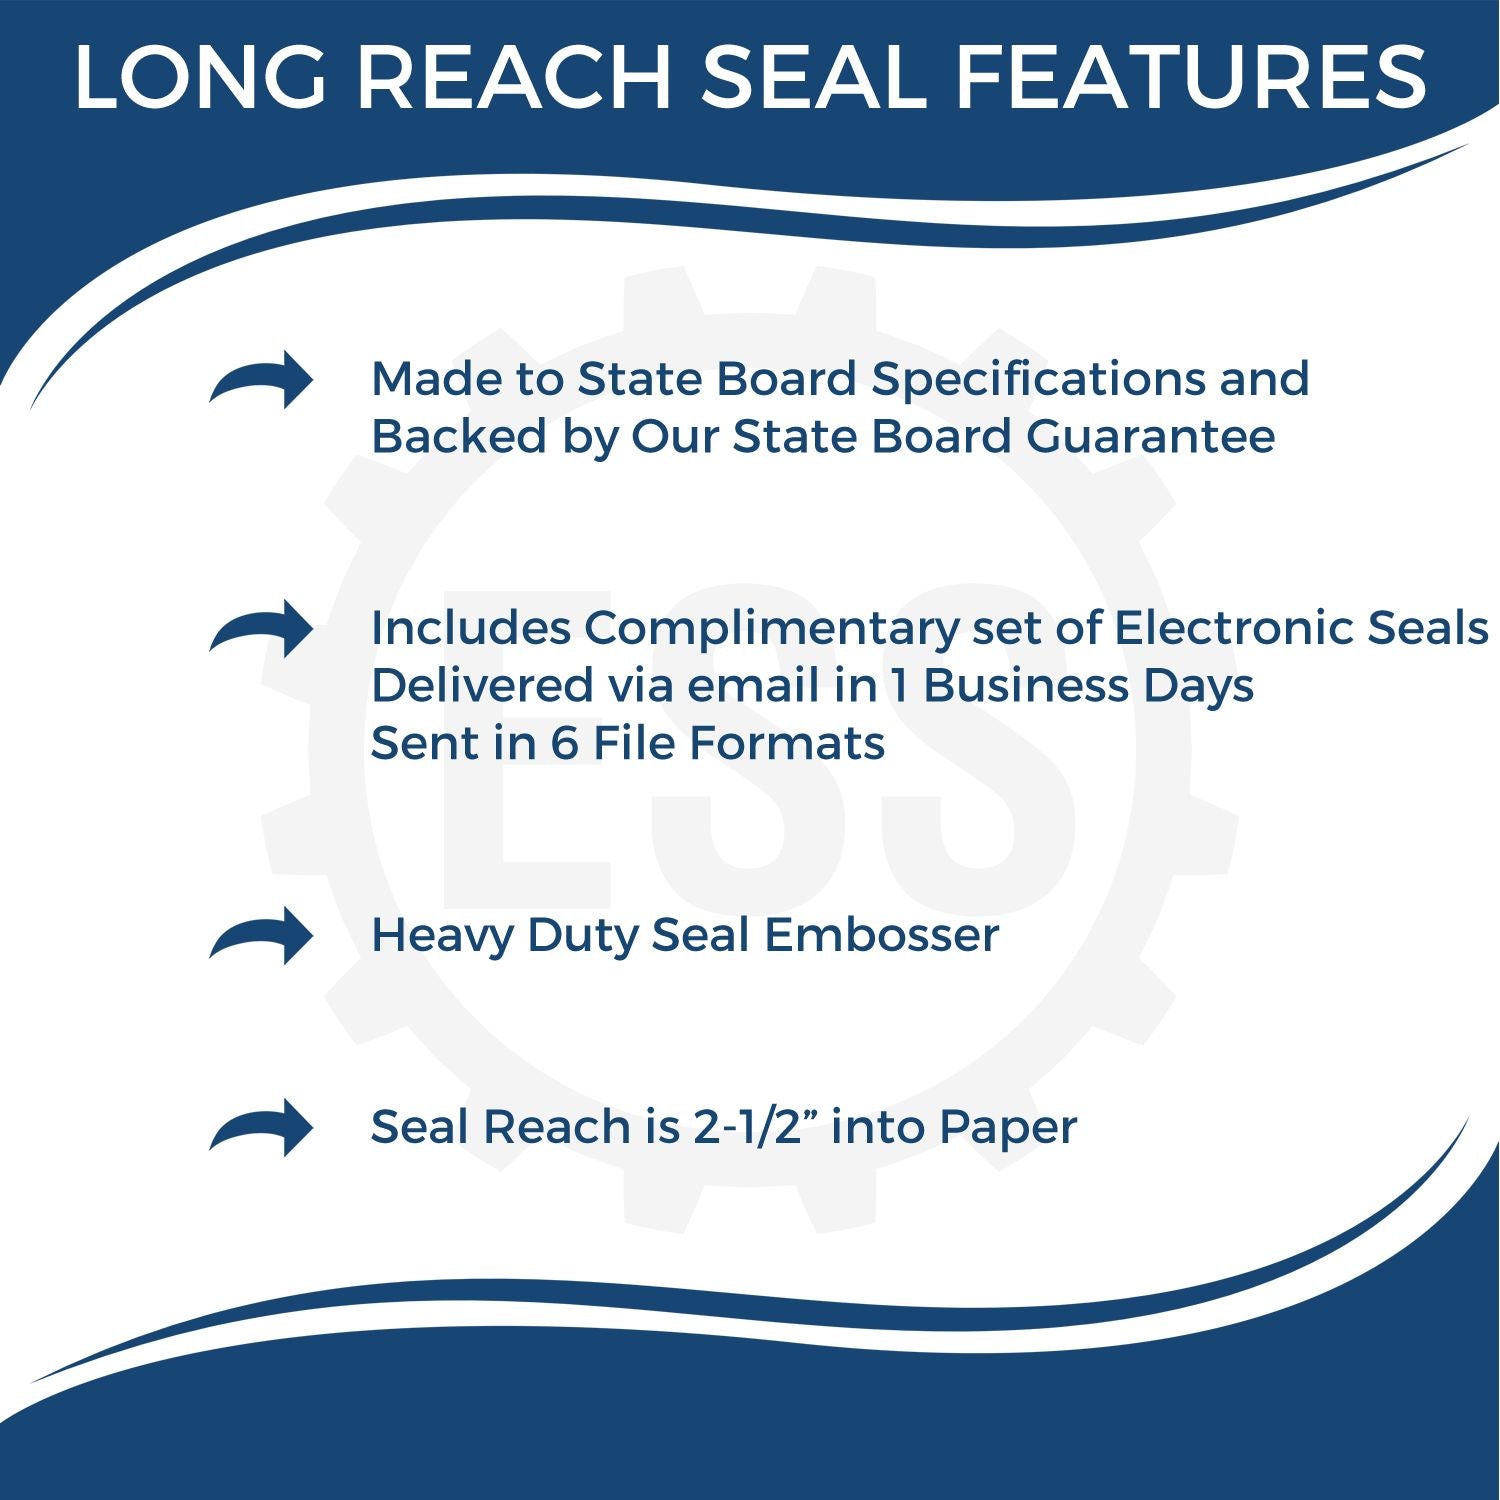 A picture of an infographic highlighting the selling points for the Long Reach Arizona Geology Seal